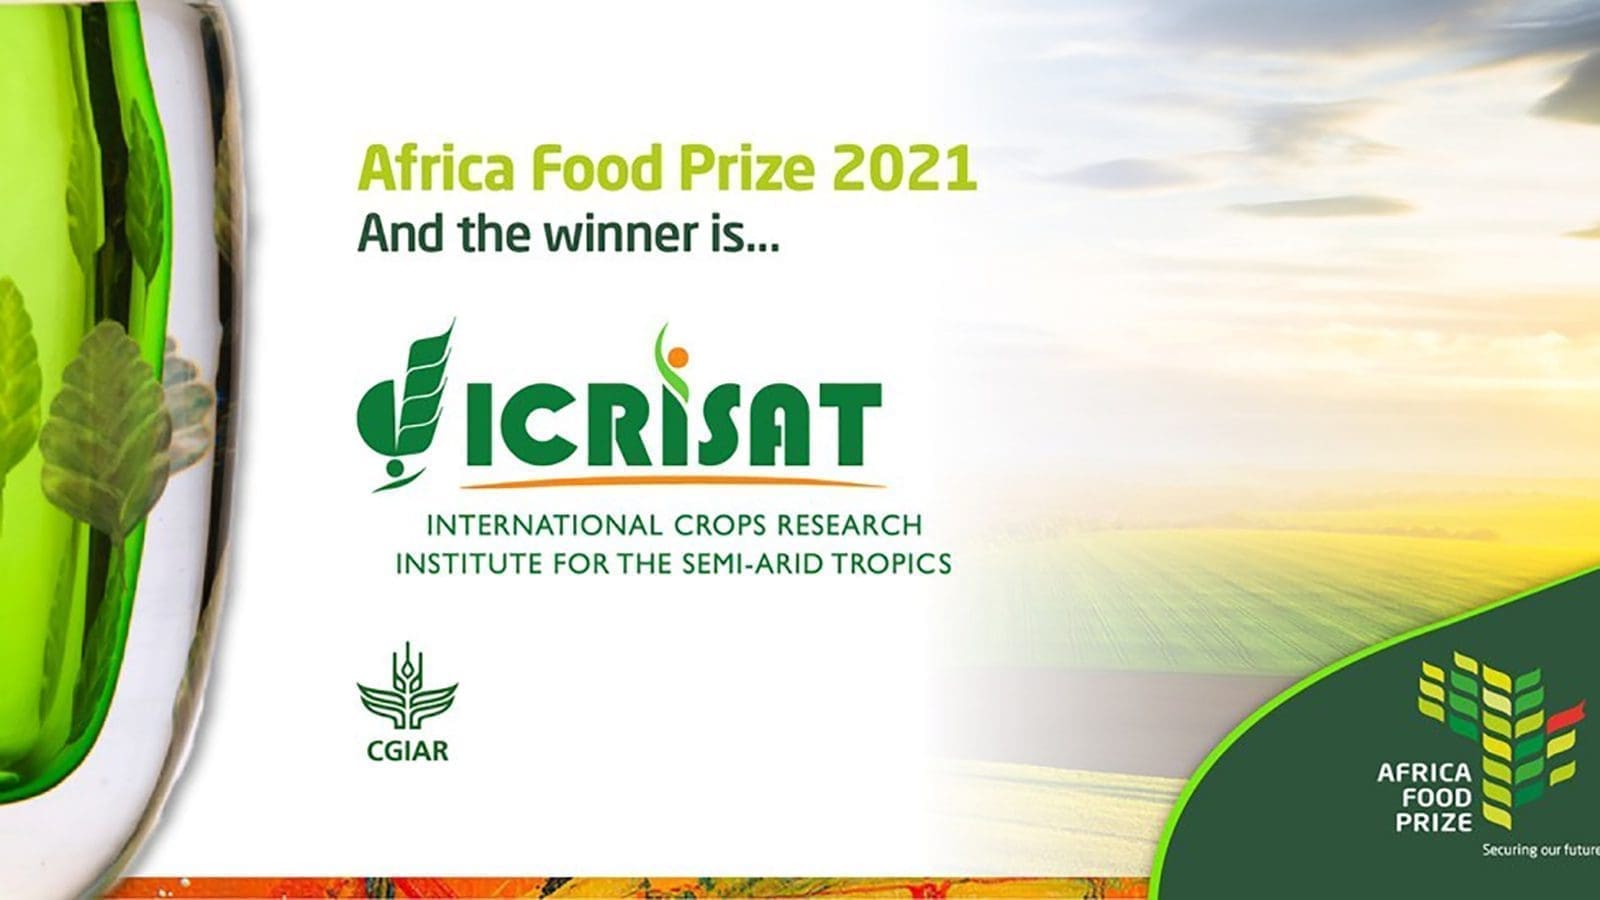 ICRISAT bags 2021 Africa Food Prize recognizing its efforts in driving food security across Africa